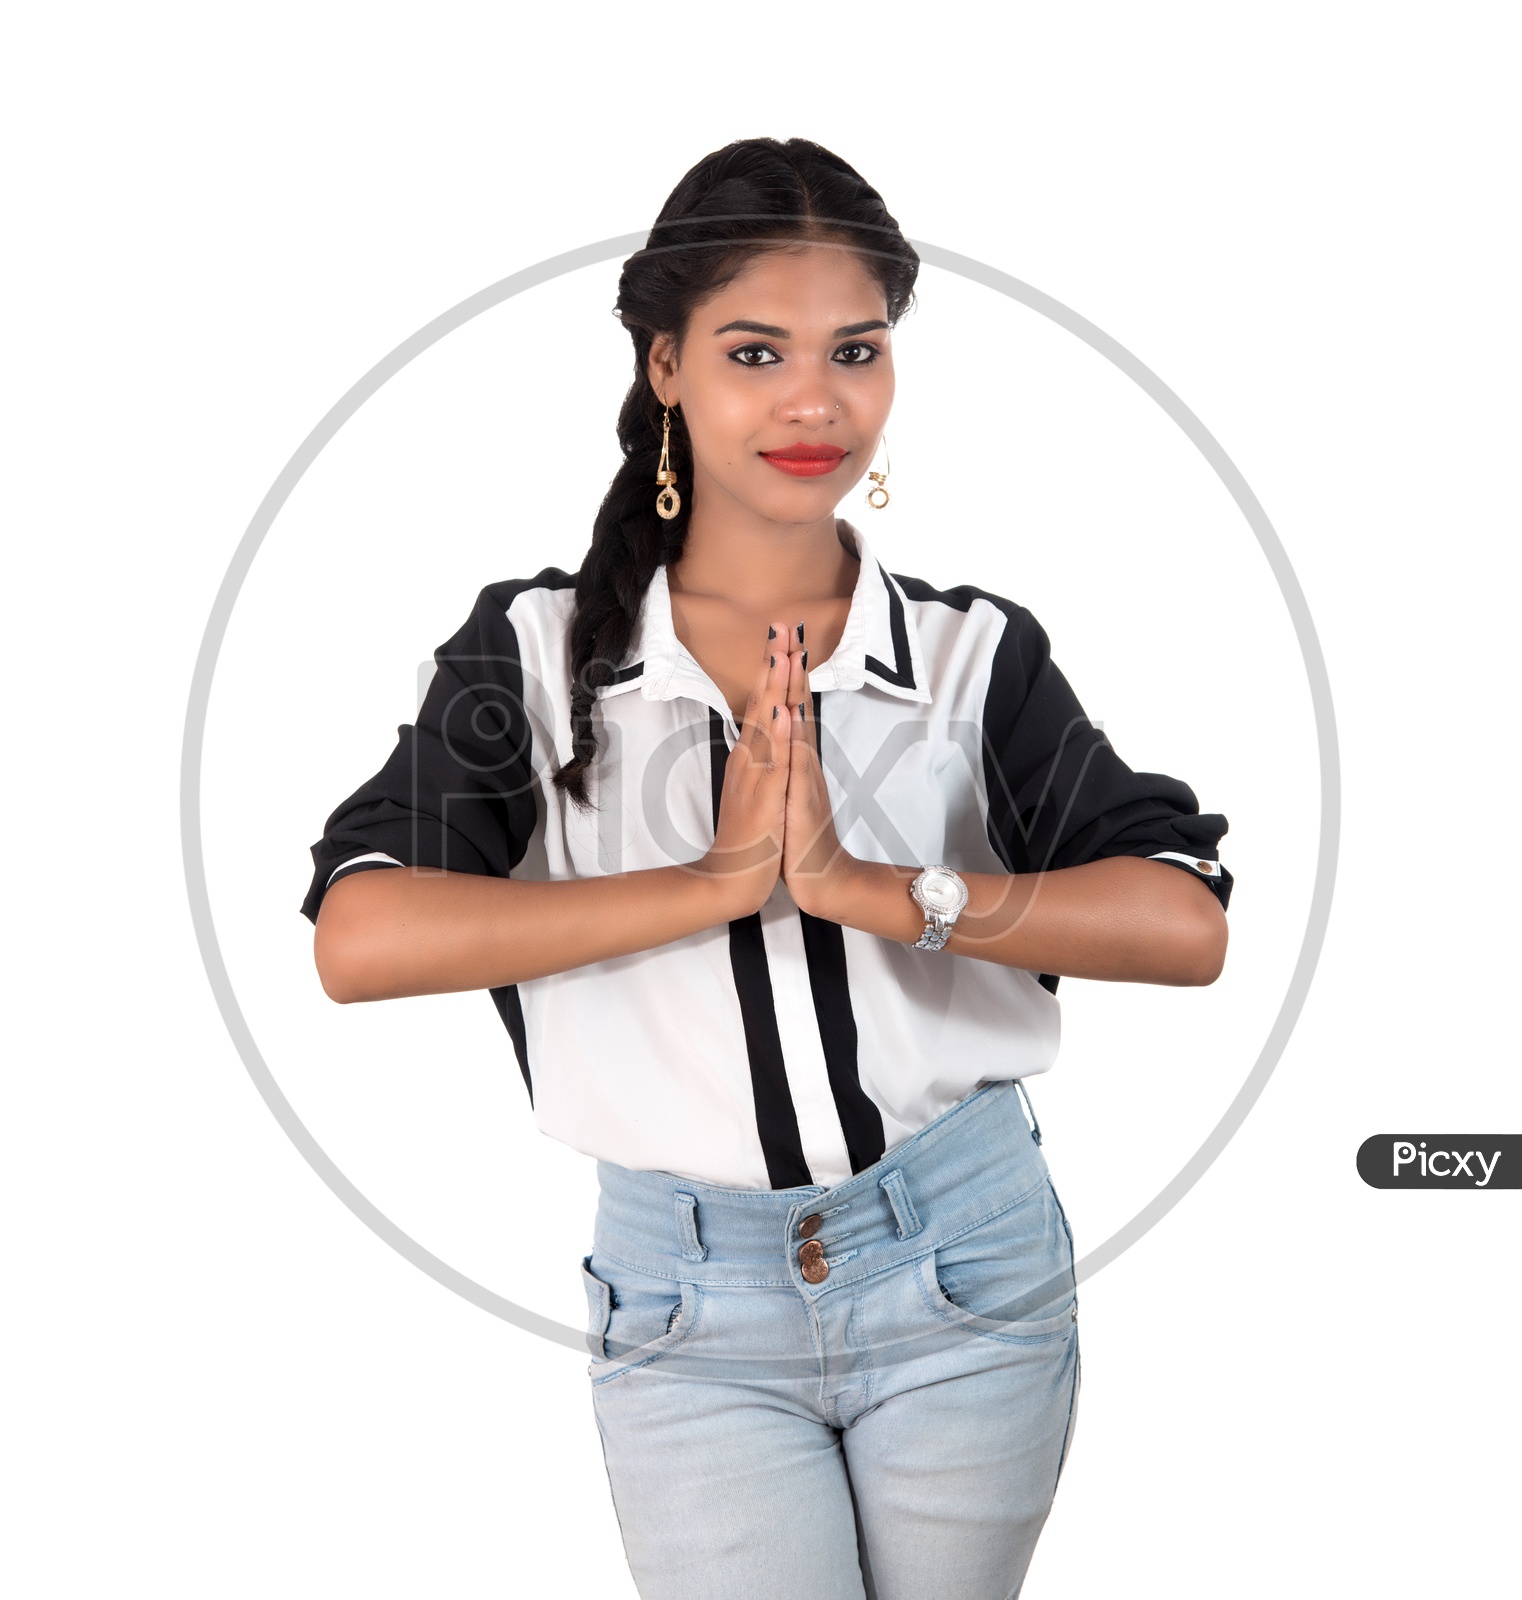 Young Beautiful Woman Showing Namaste  Gestures And Smile On Face On an Isolated White Background